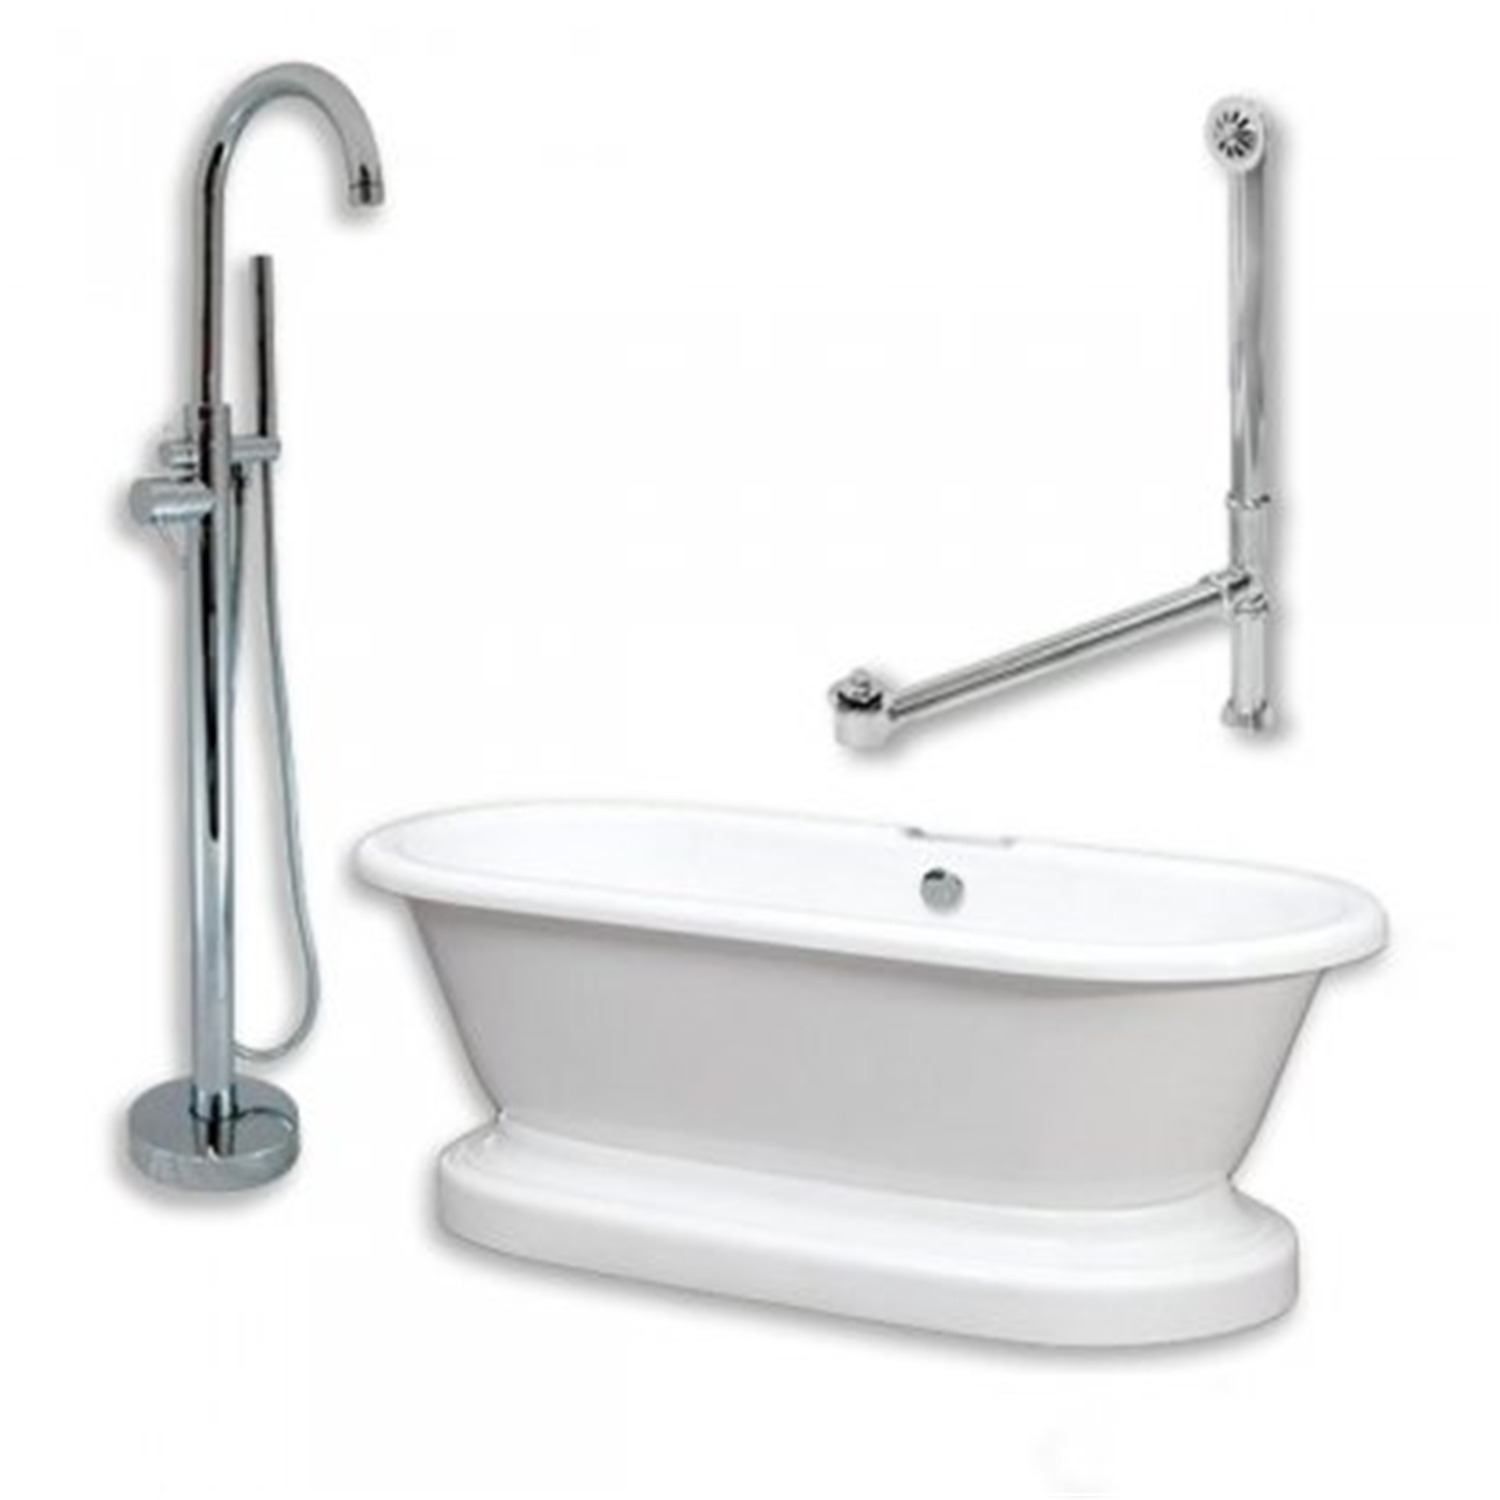 Cast Iron Slipper Clawfoot Tub 61" X 30" with no Faucet Drillings and Complete Oil Rubbed Bronze Modern Freestanding Tub Filler with Hand Held Shower Assembly Plumbing Package - image 1 of 1